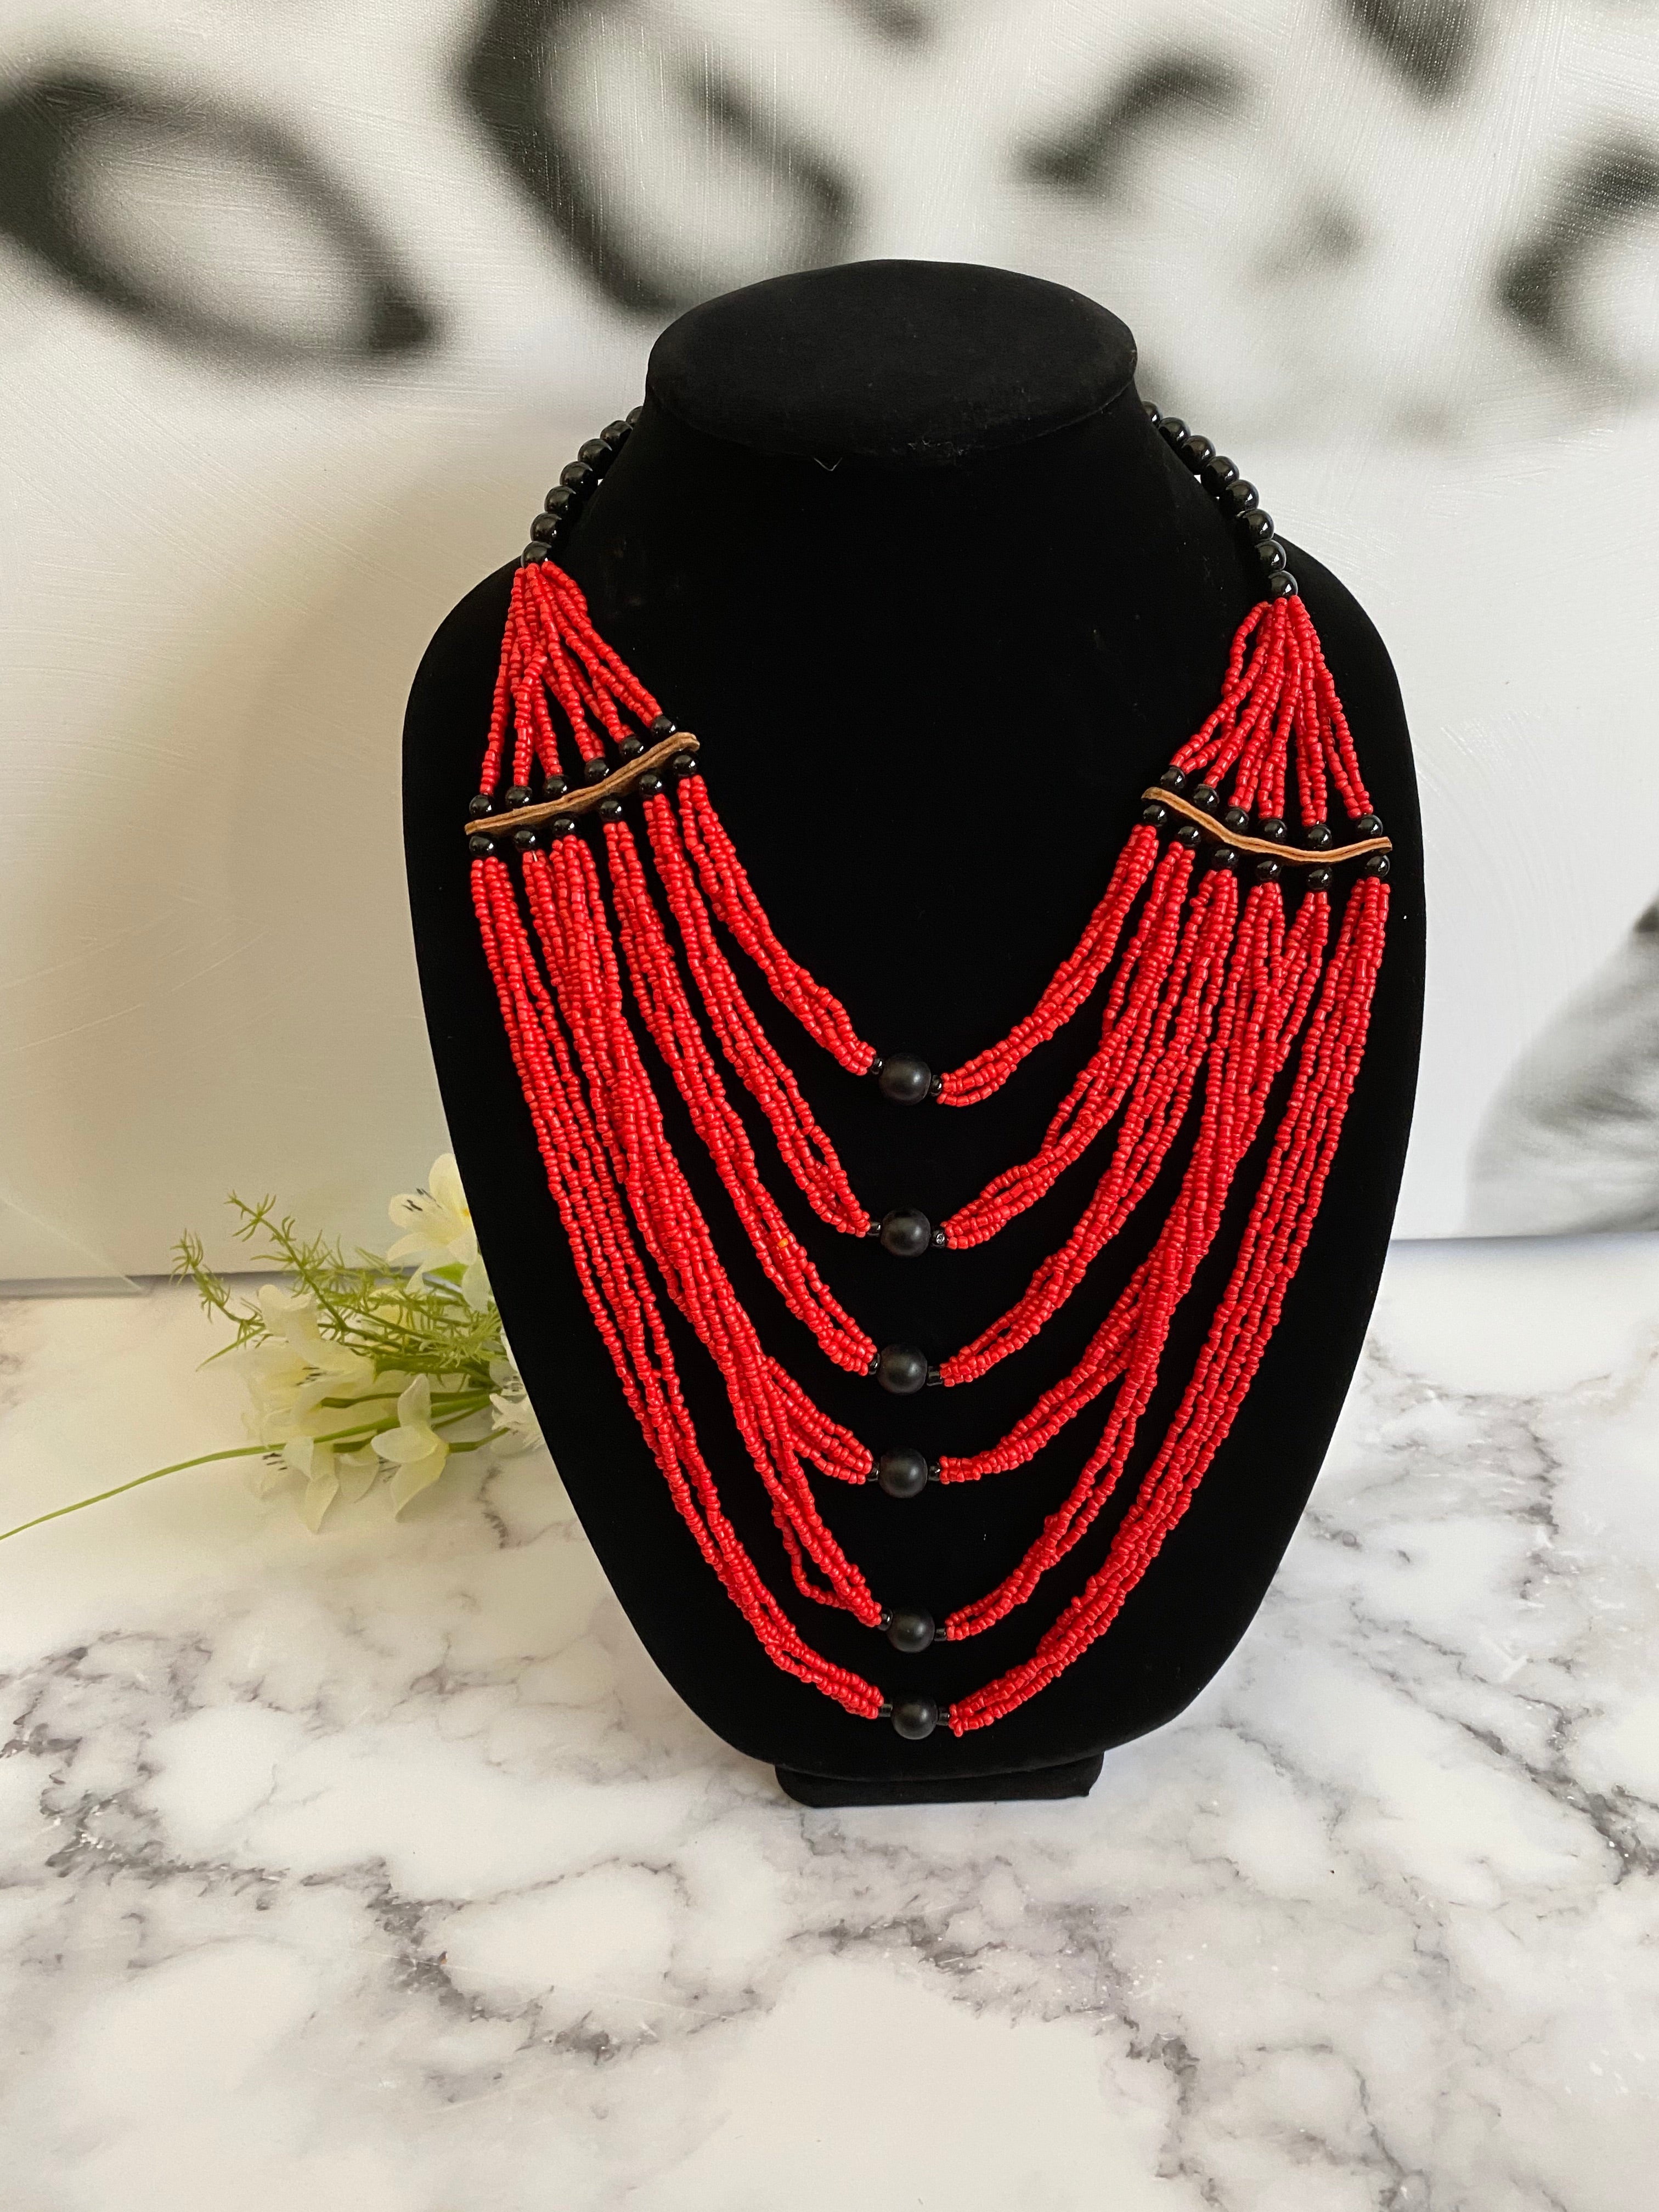 Tribal beaded necklace